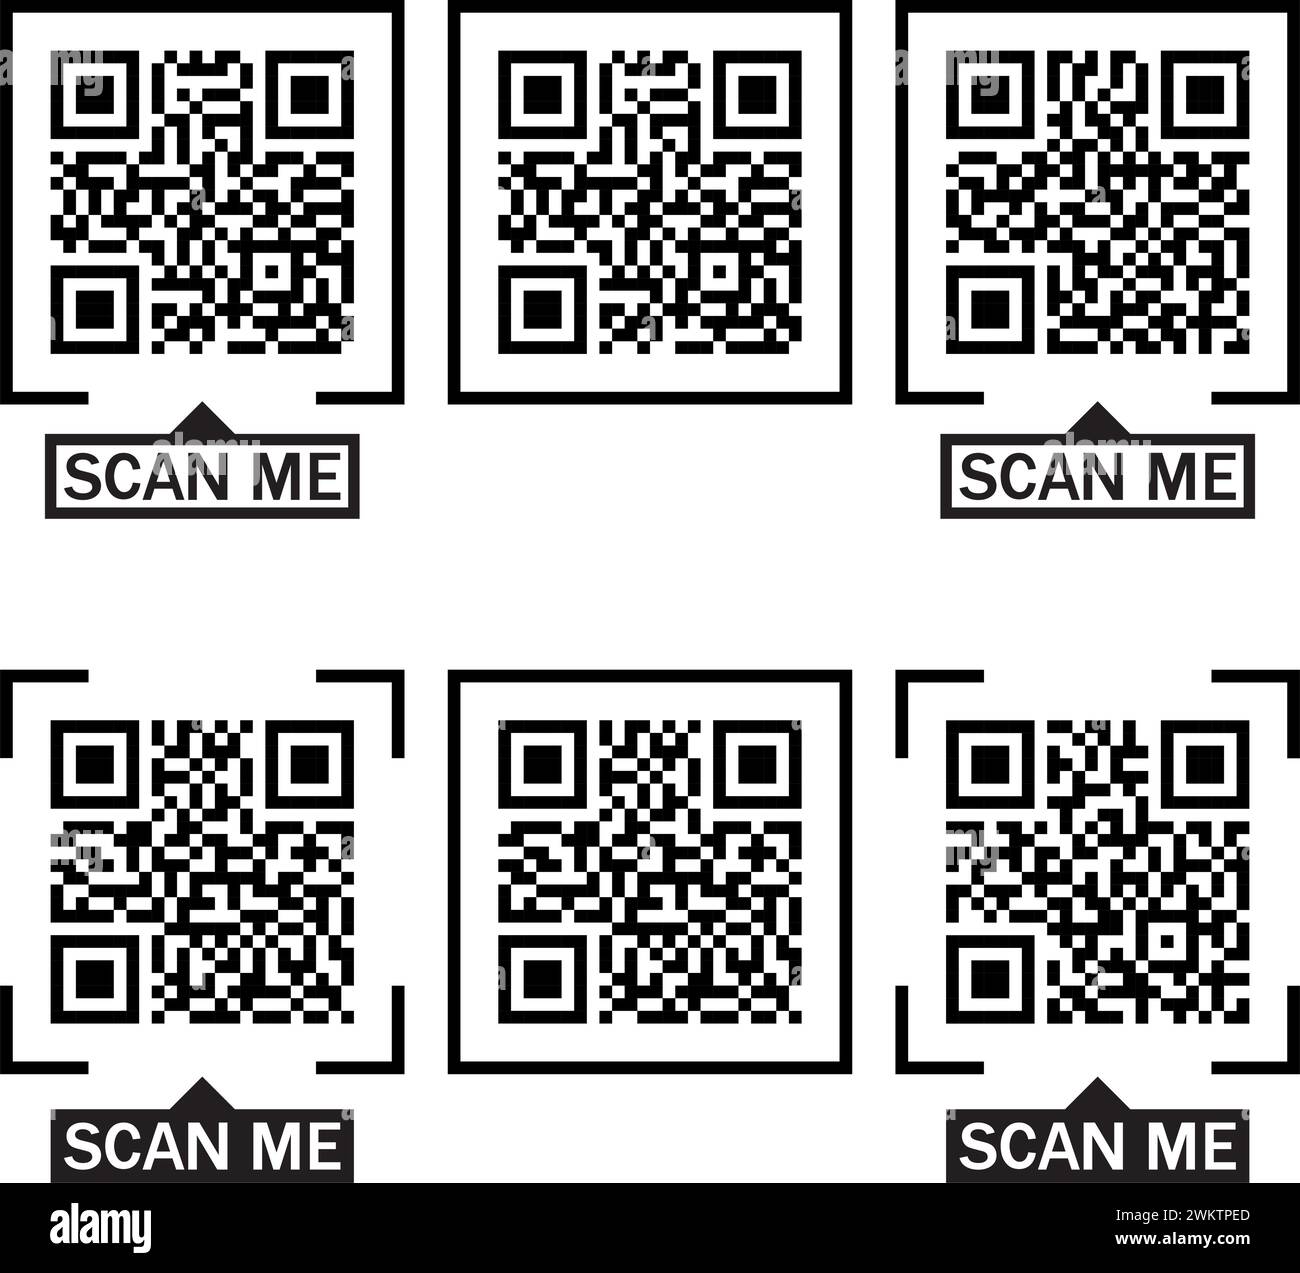 vector qr codes isolated on white background. supermarket scan qr codes Stock Vector